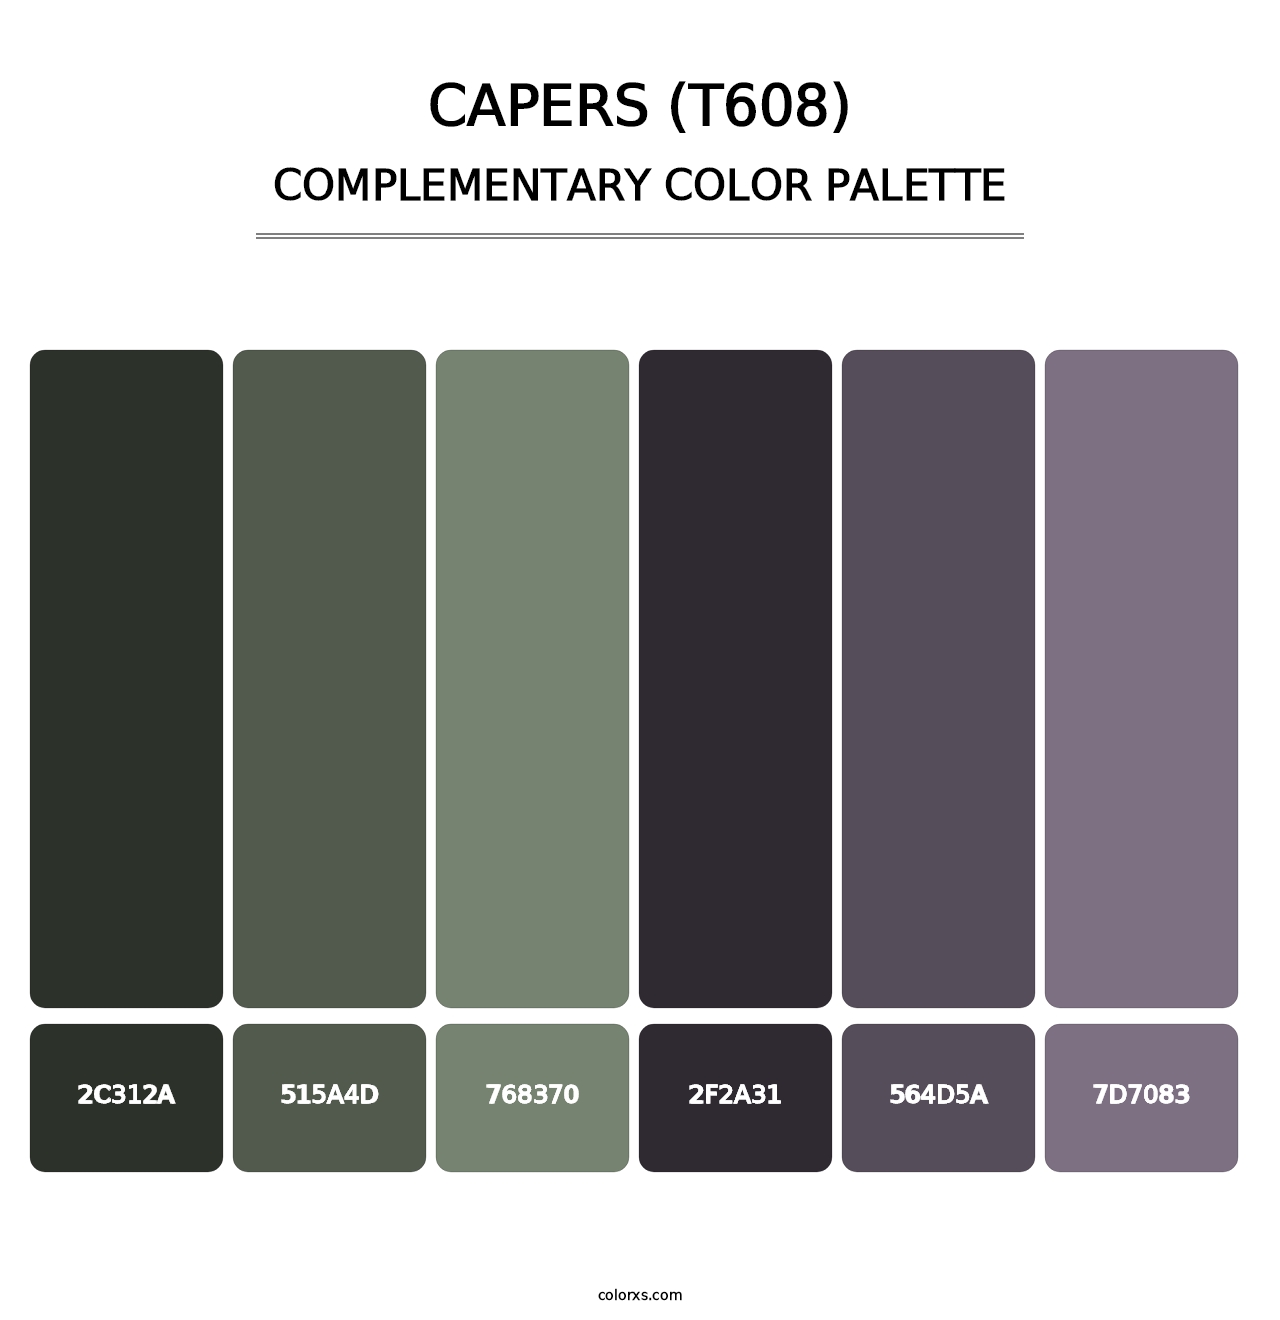 Capers (T608) - Complementary Color Palette